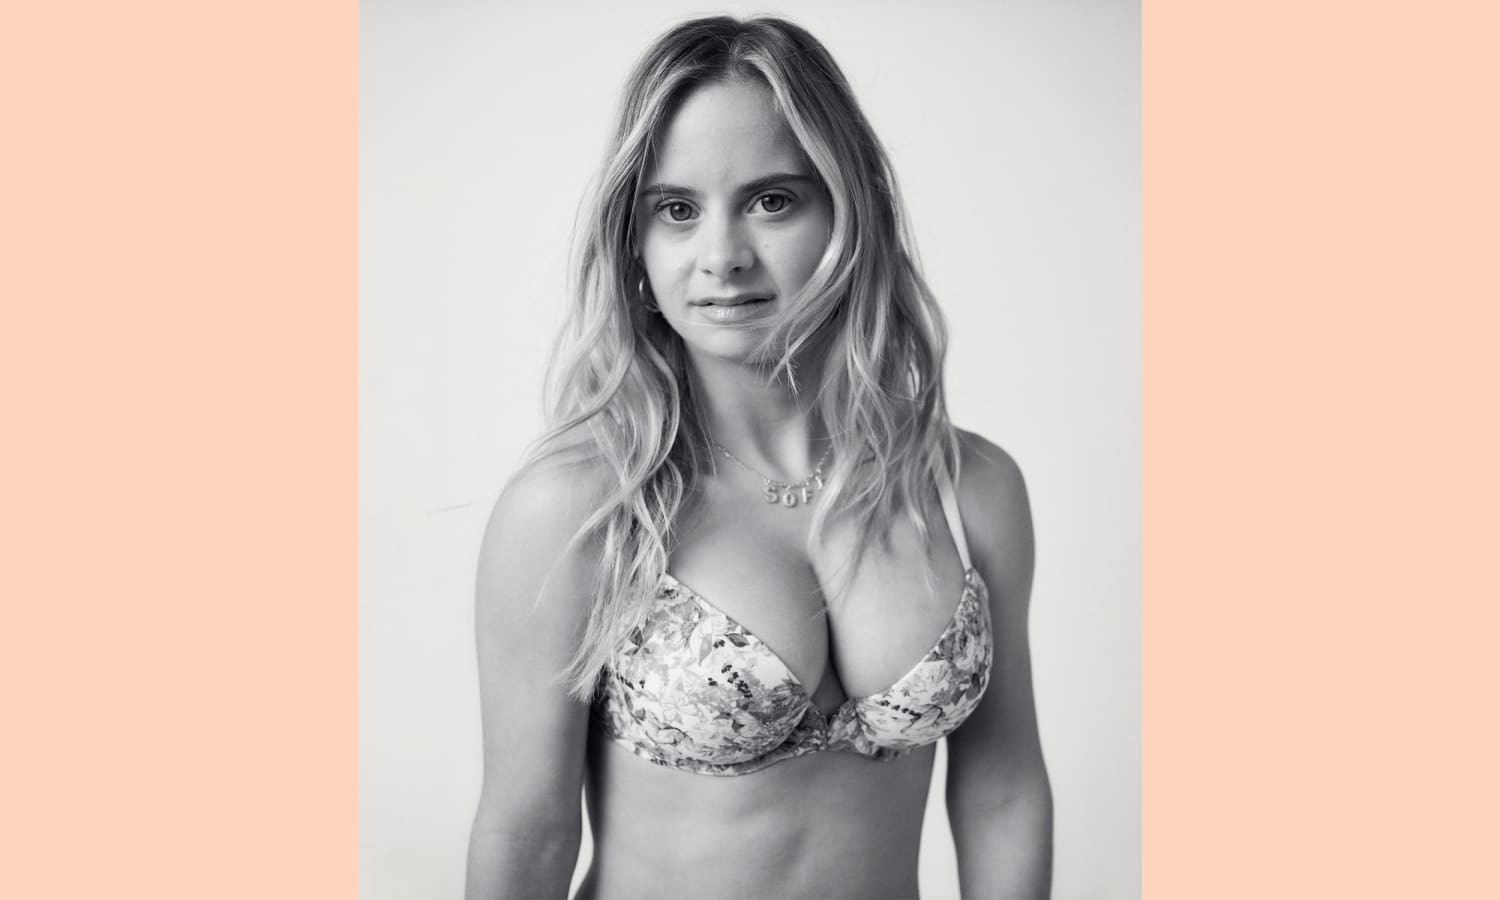 Sofía Jirau, Victoria's Secret model with Down syndrome, on historic first